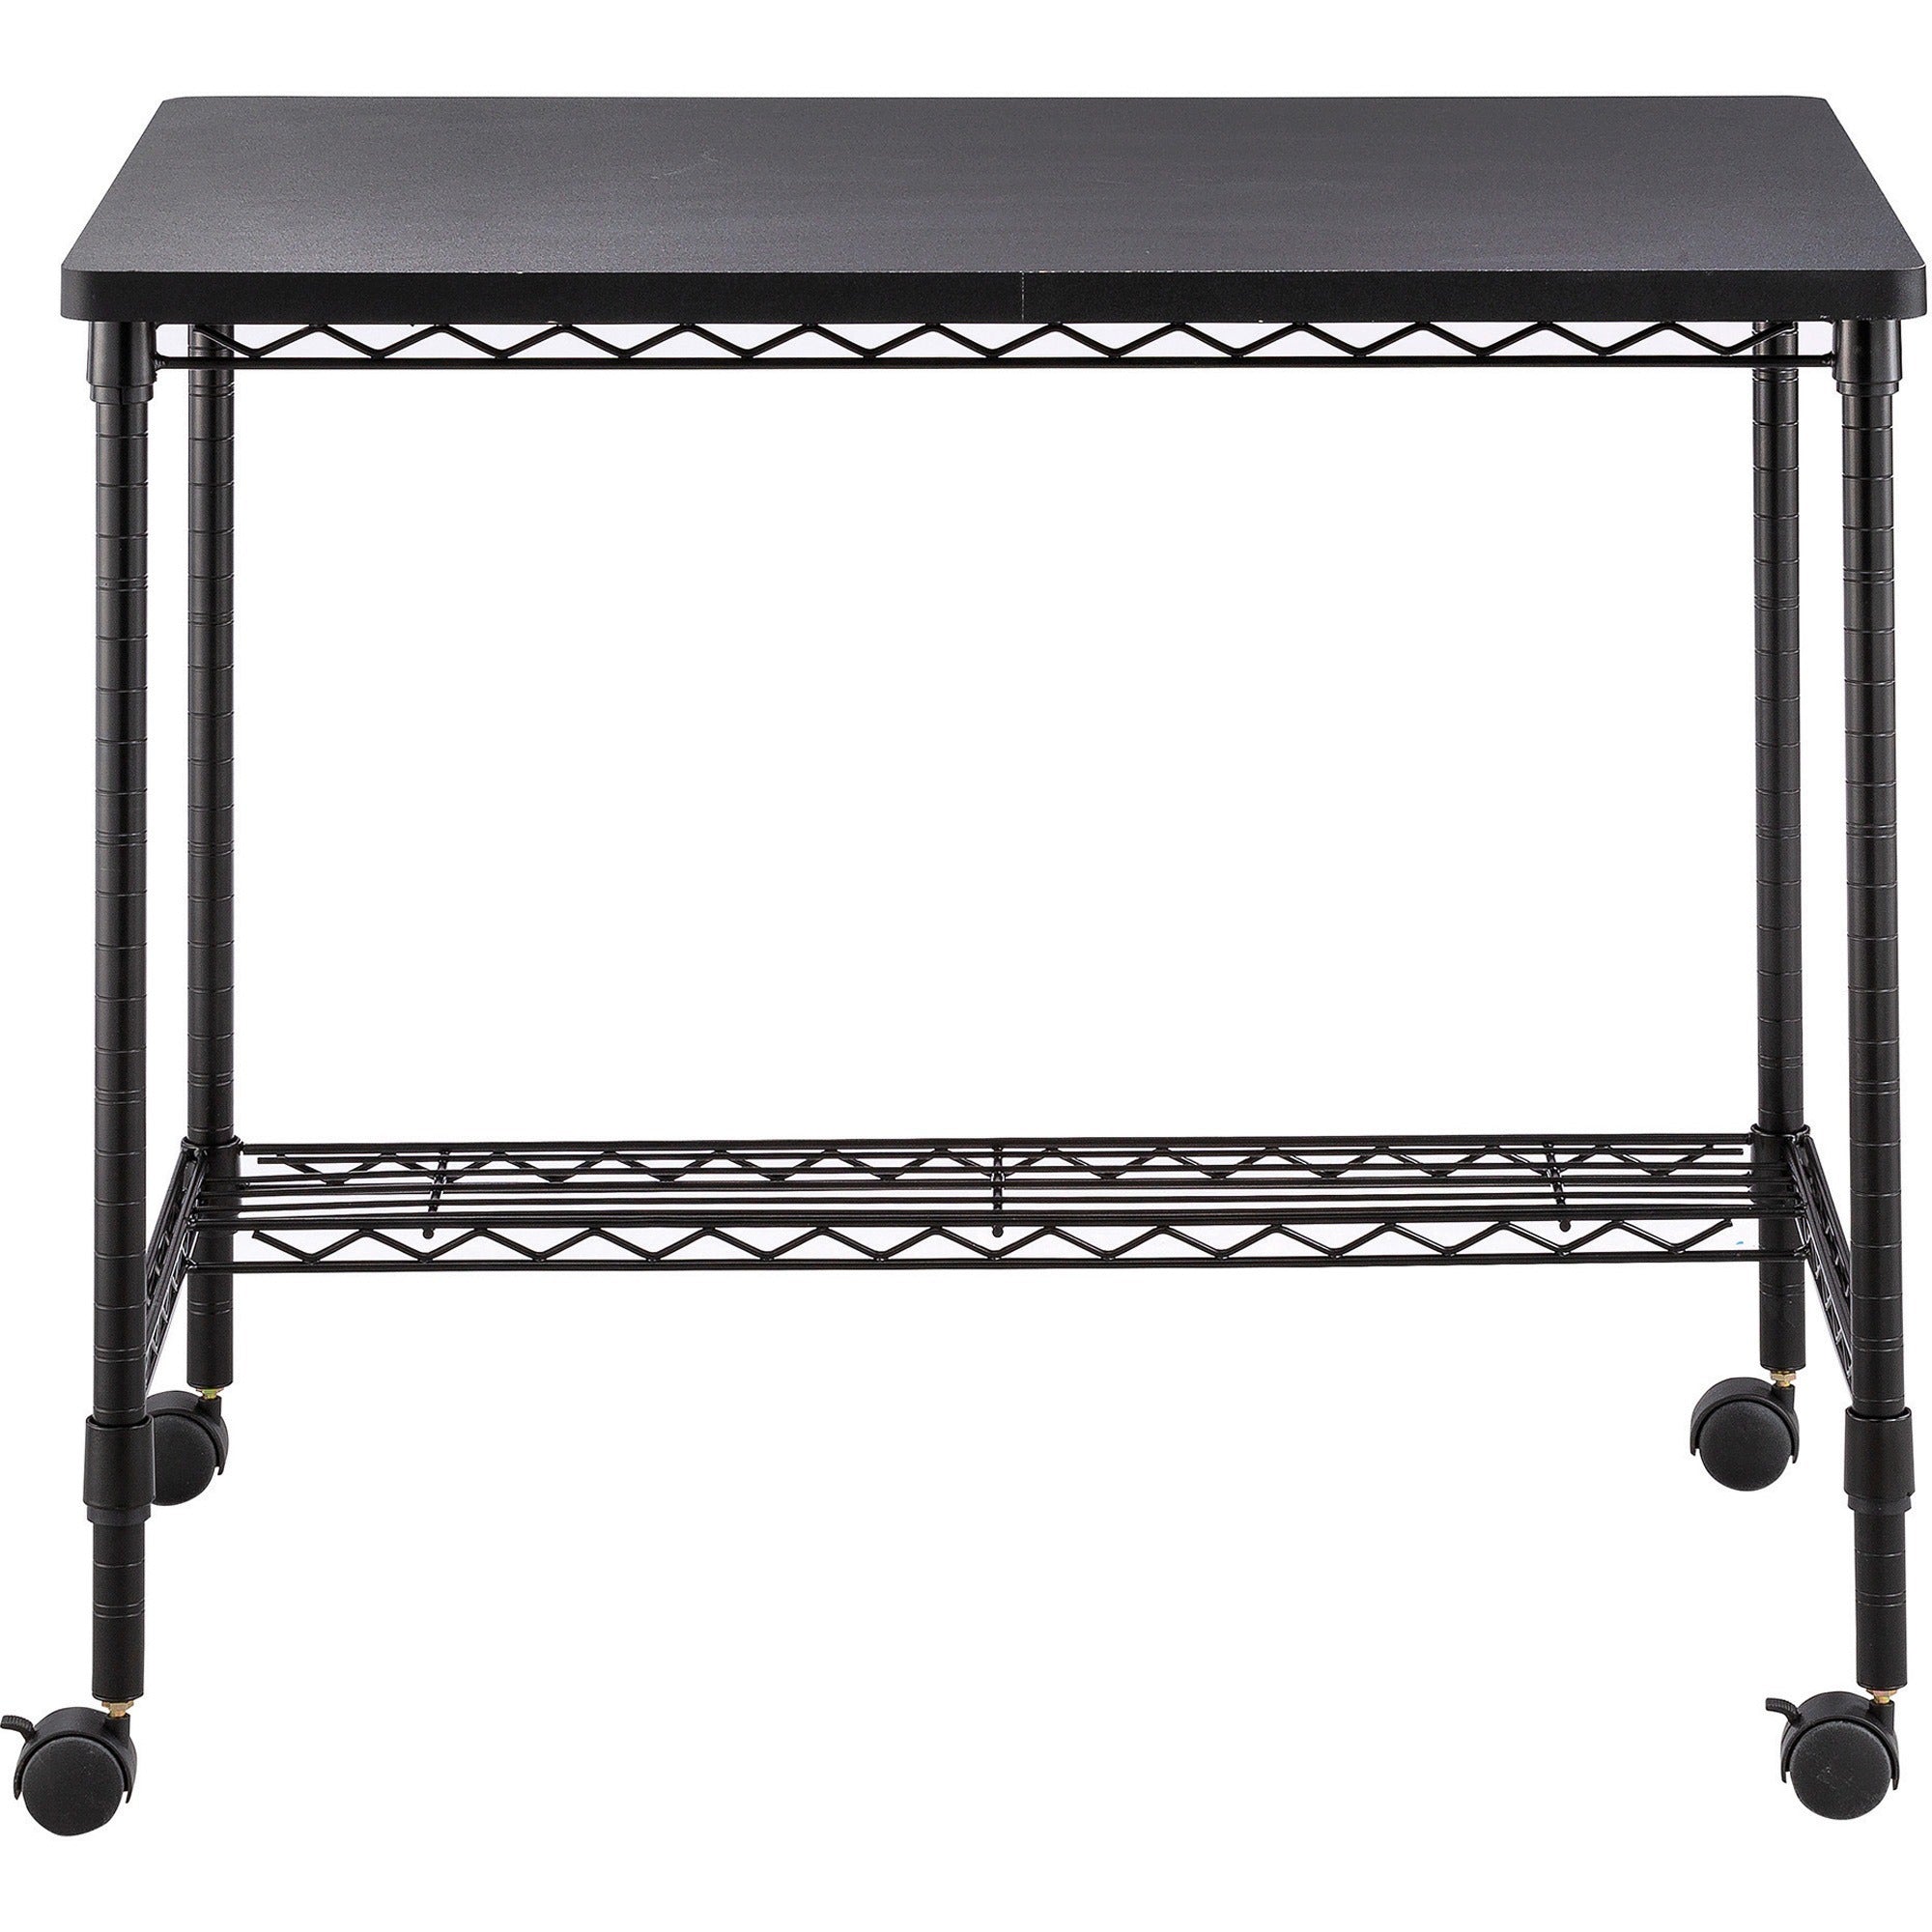 safco-mobile-wire-desk-for-table-topmelamine-black-top-x-3575-table-top-width-x-24-table-top-depth-3075-height-assembly-required-black-1-each_saf5203bl - 2